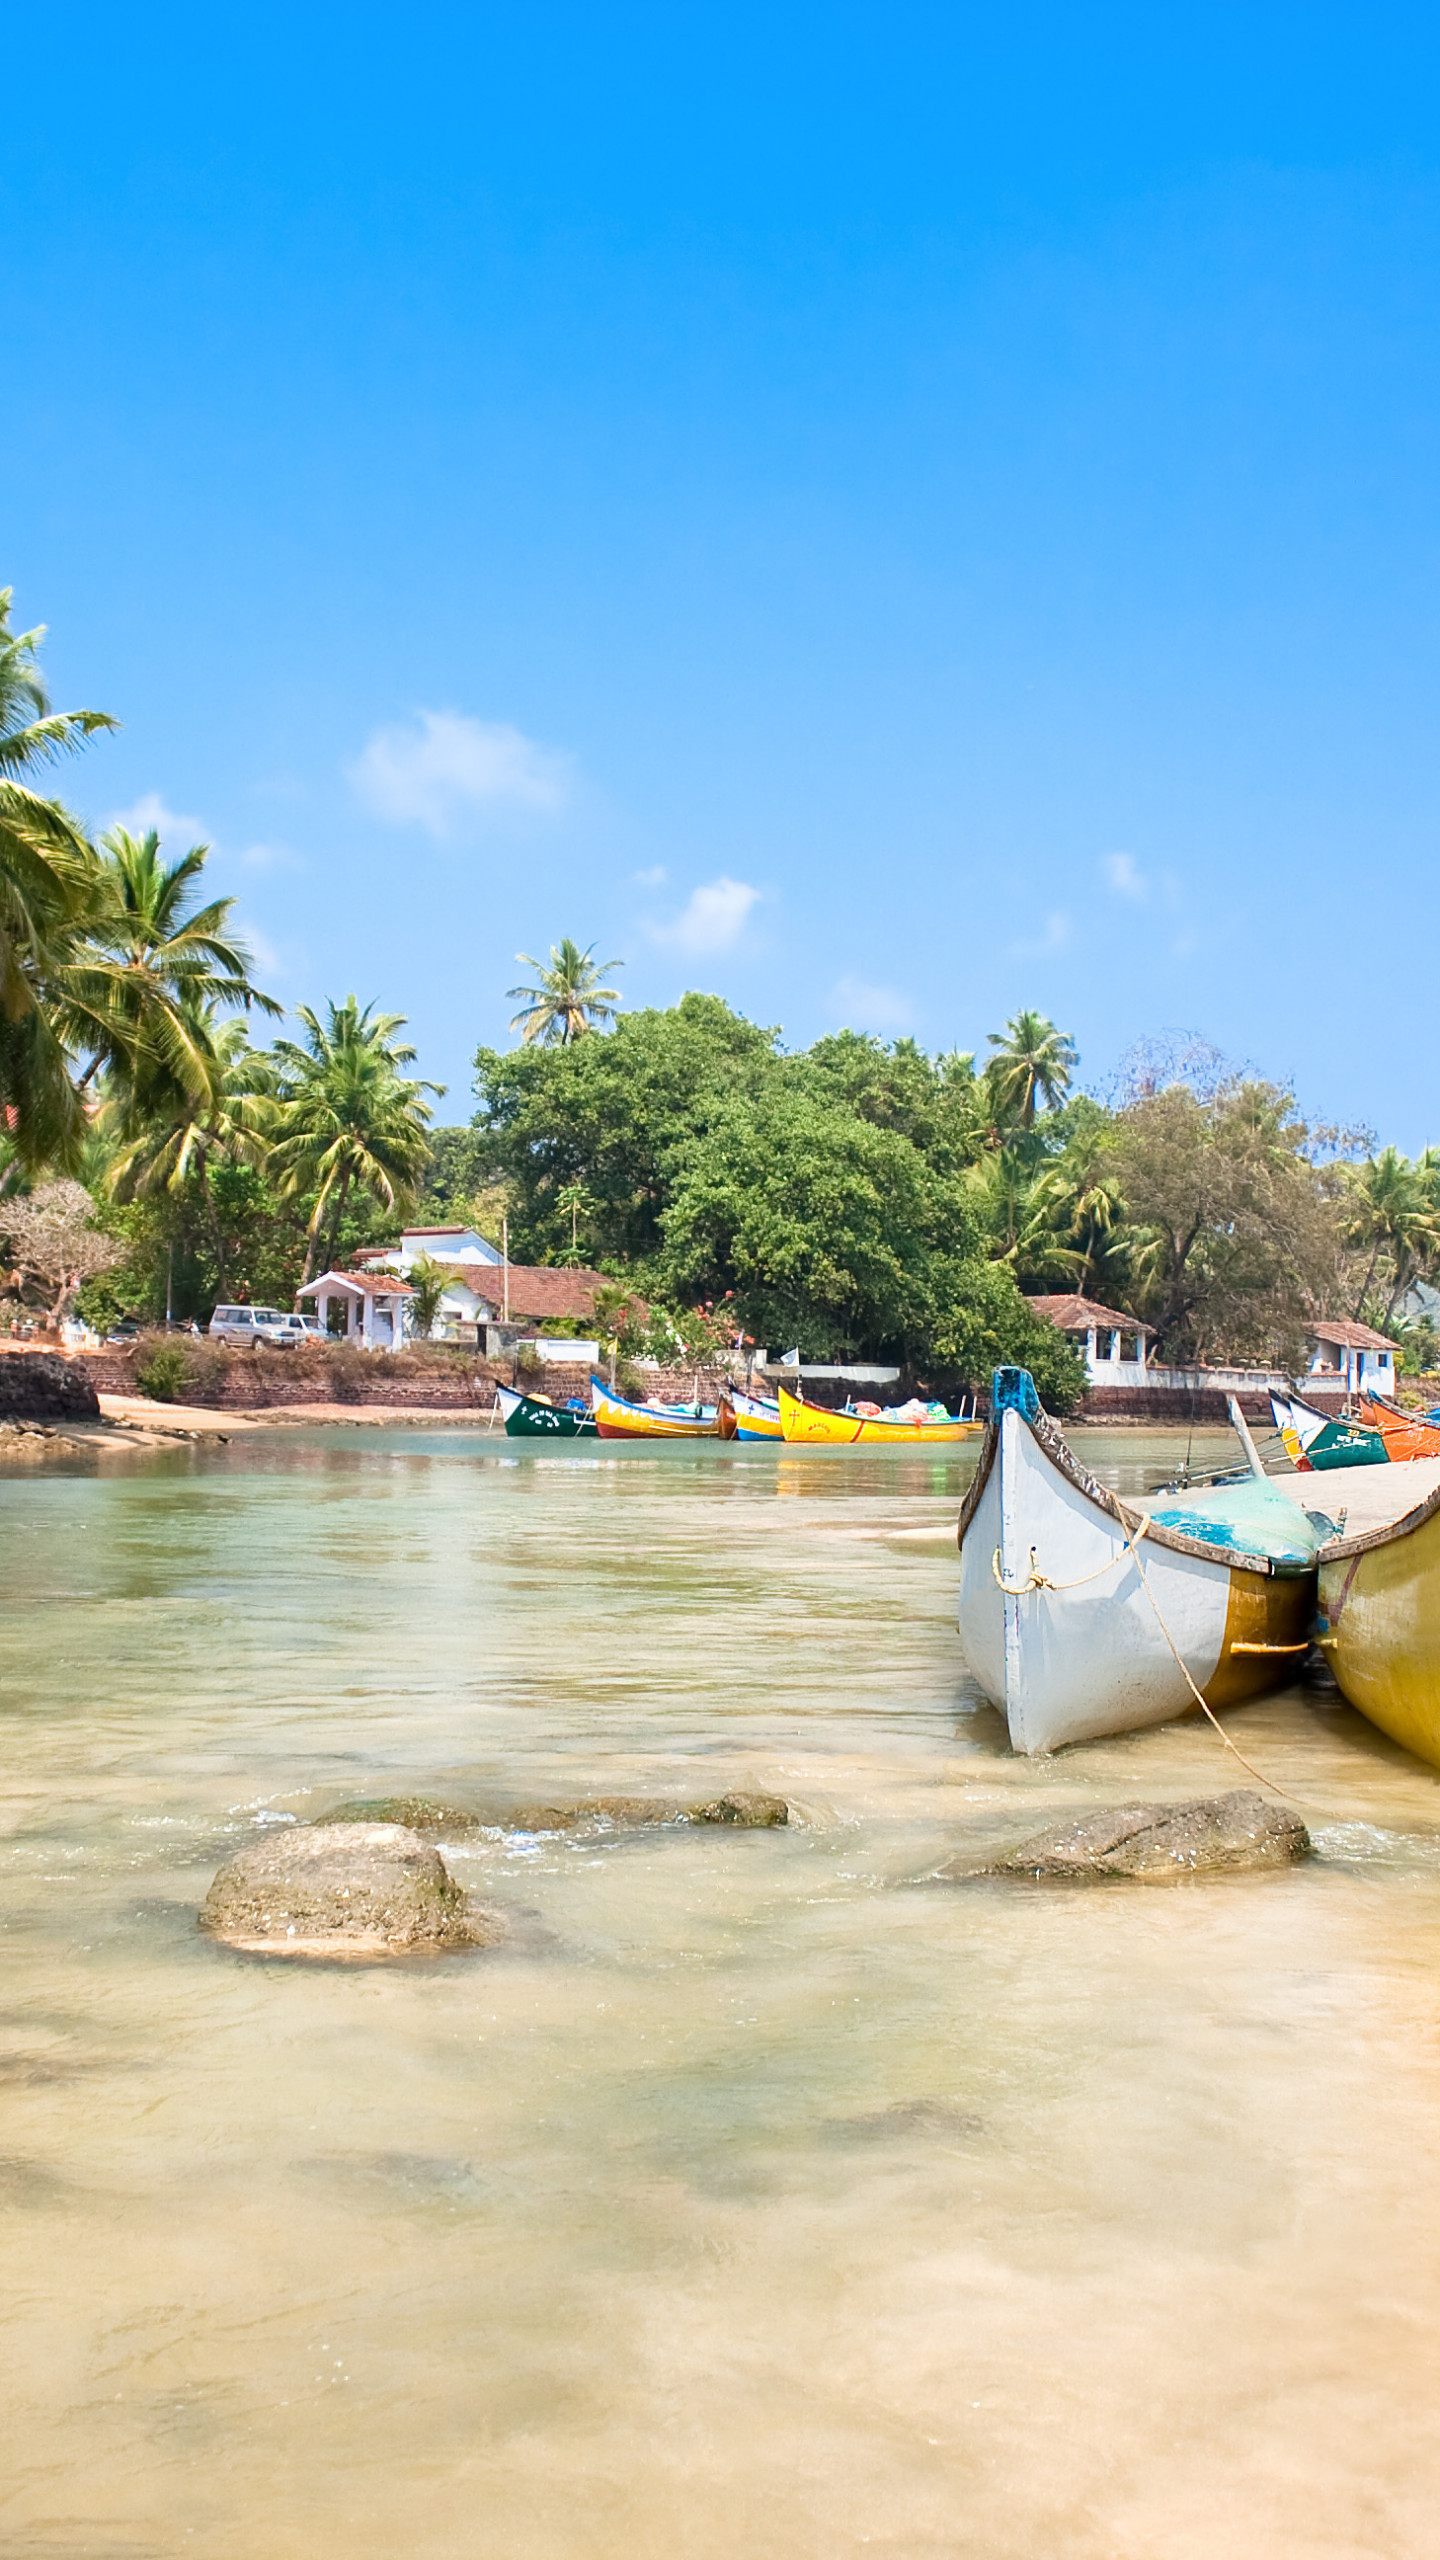 Wallpaper Goa, 5k, 4k wallpaper, India, Indian ocean, palms, boats, travel,  tourism, Best Beaches in the World, Nature #6143